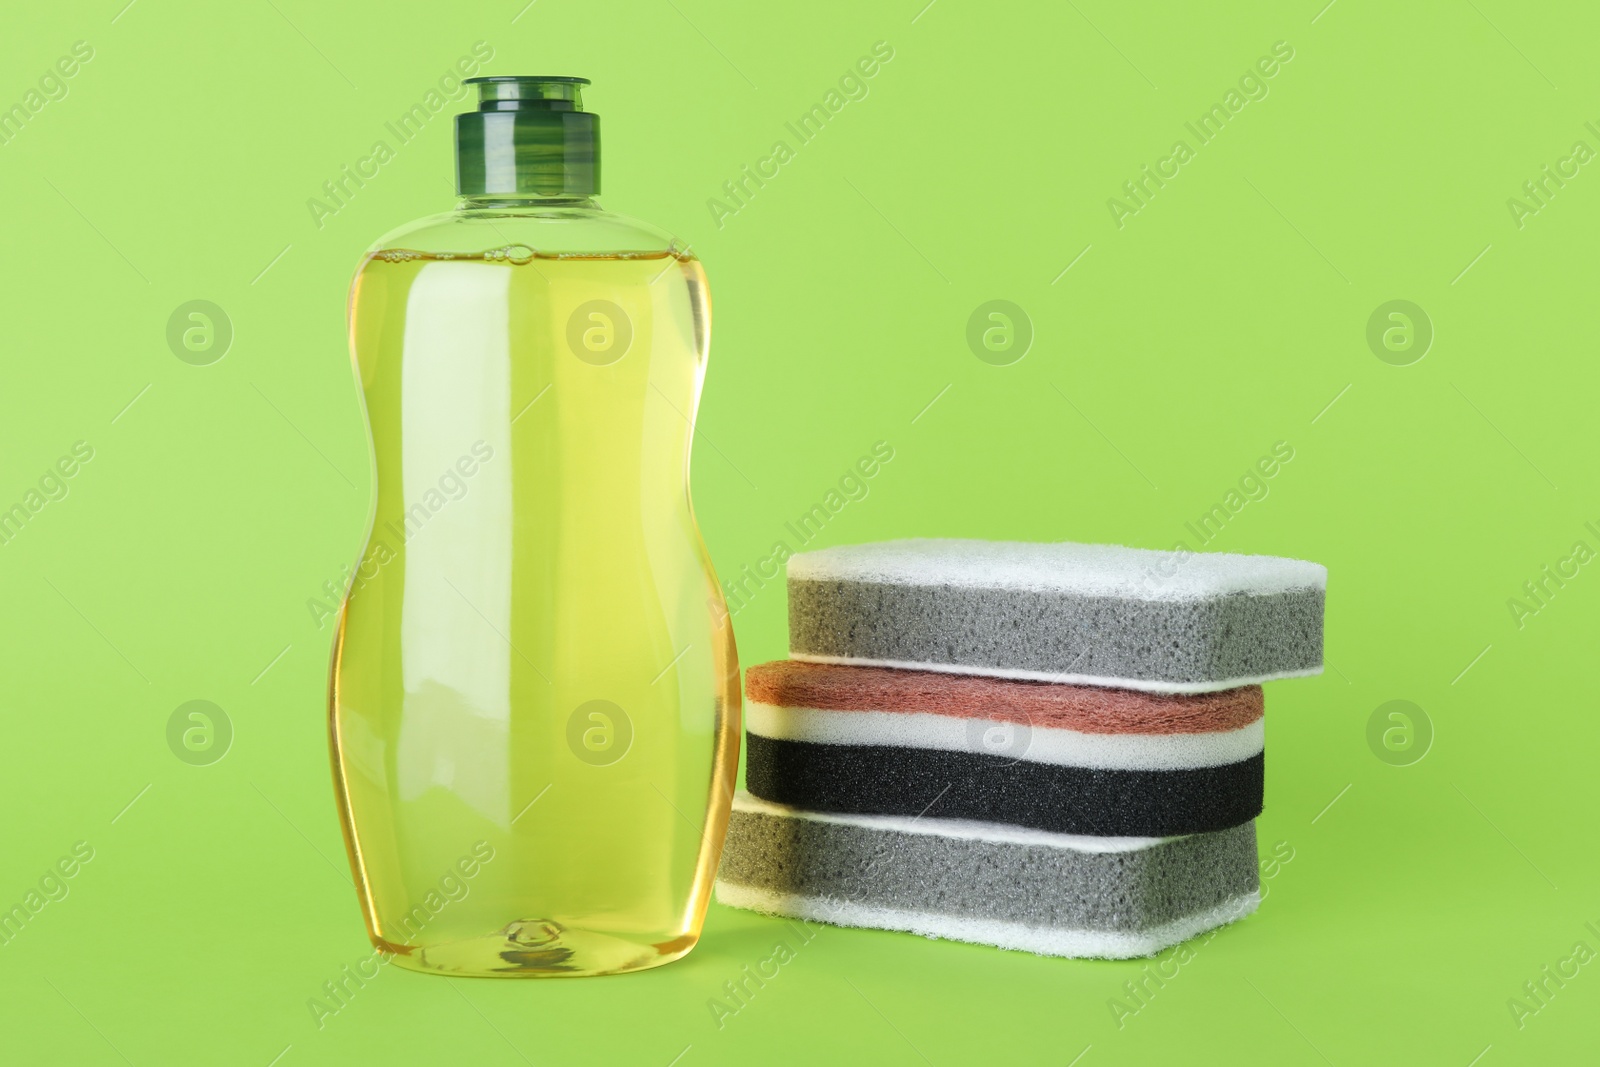 Photo of Cleaning detergent and sponges on green background